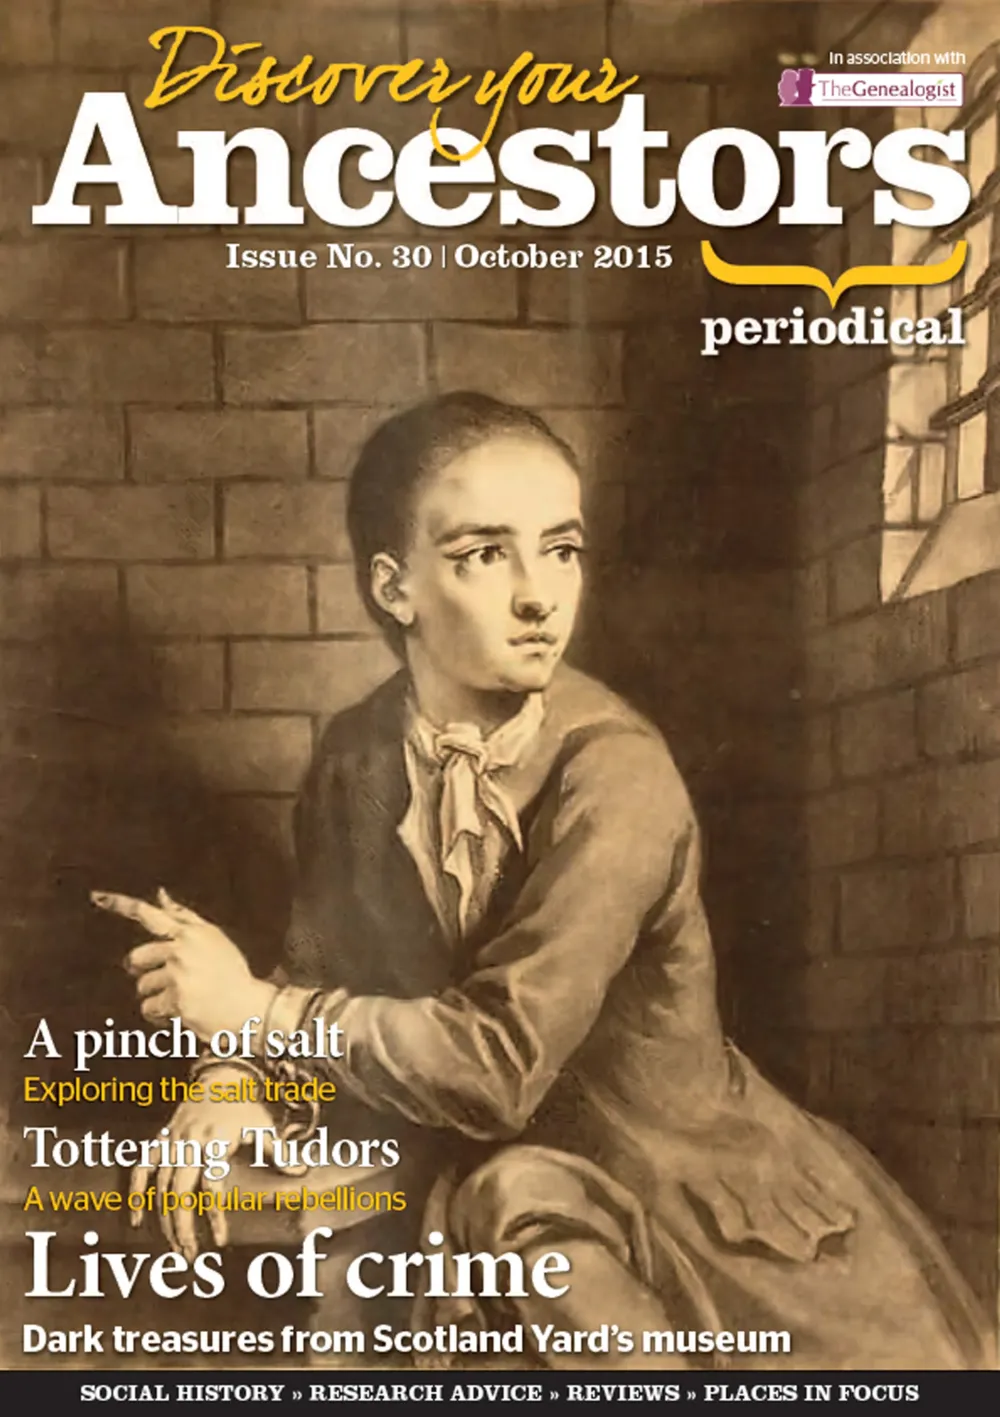 Discover Your Ancestors Periodical - October 2015